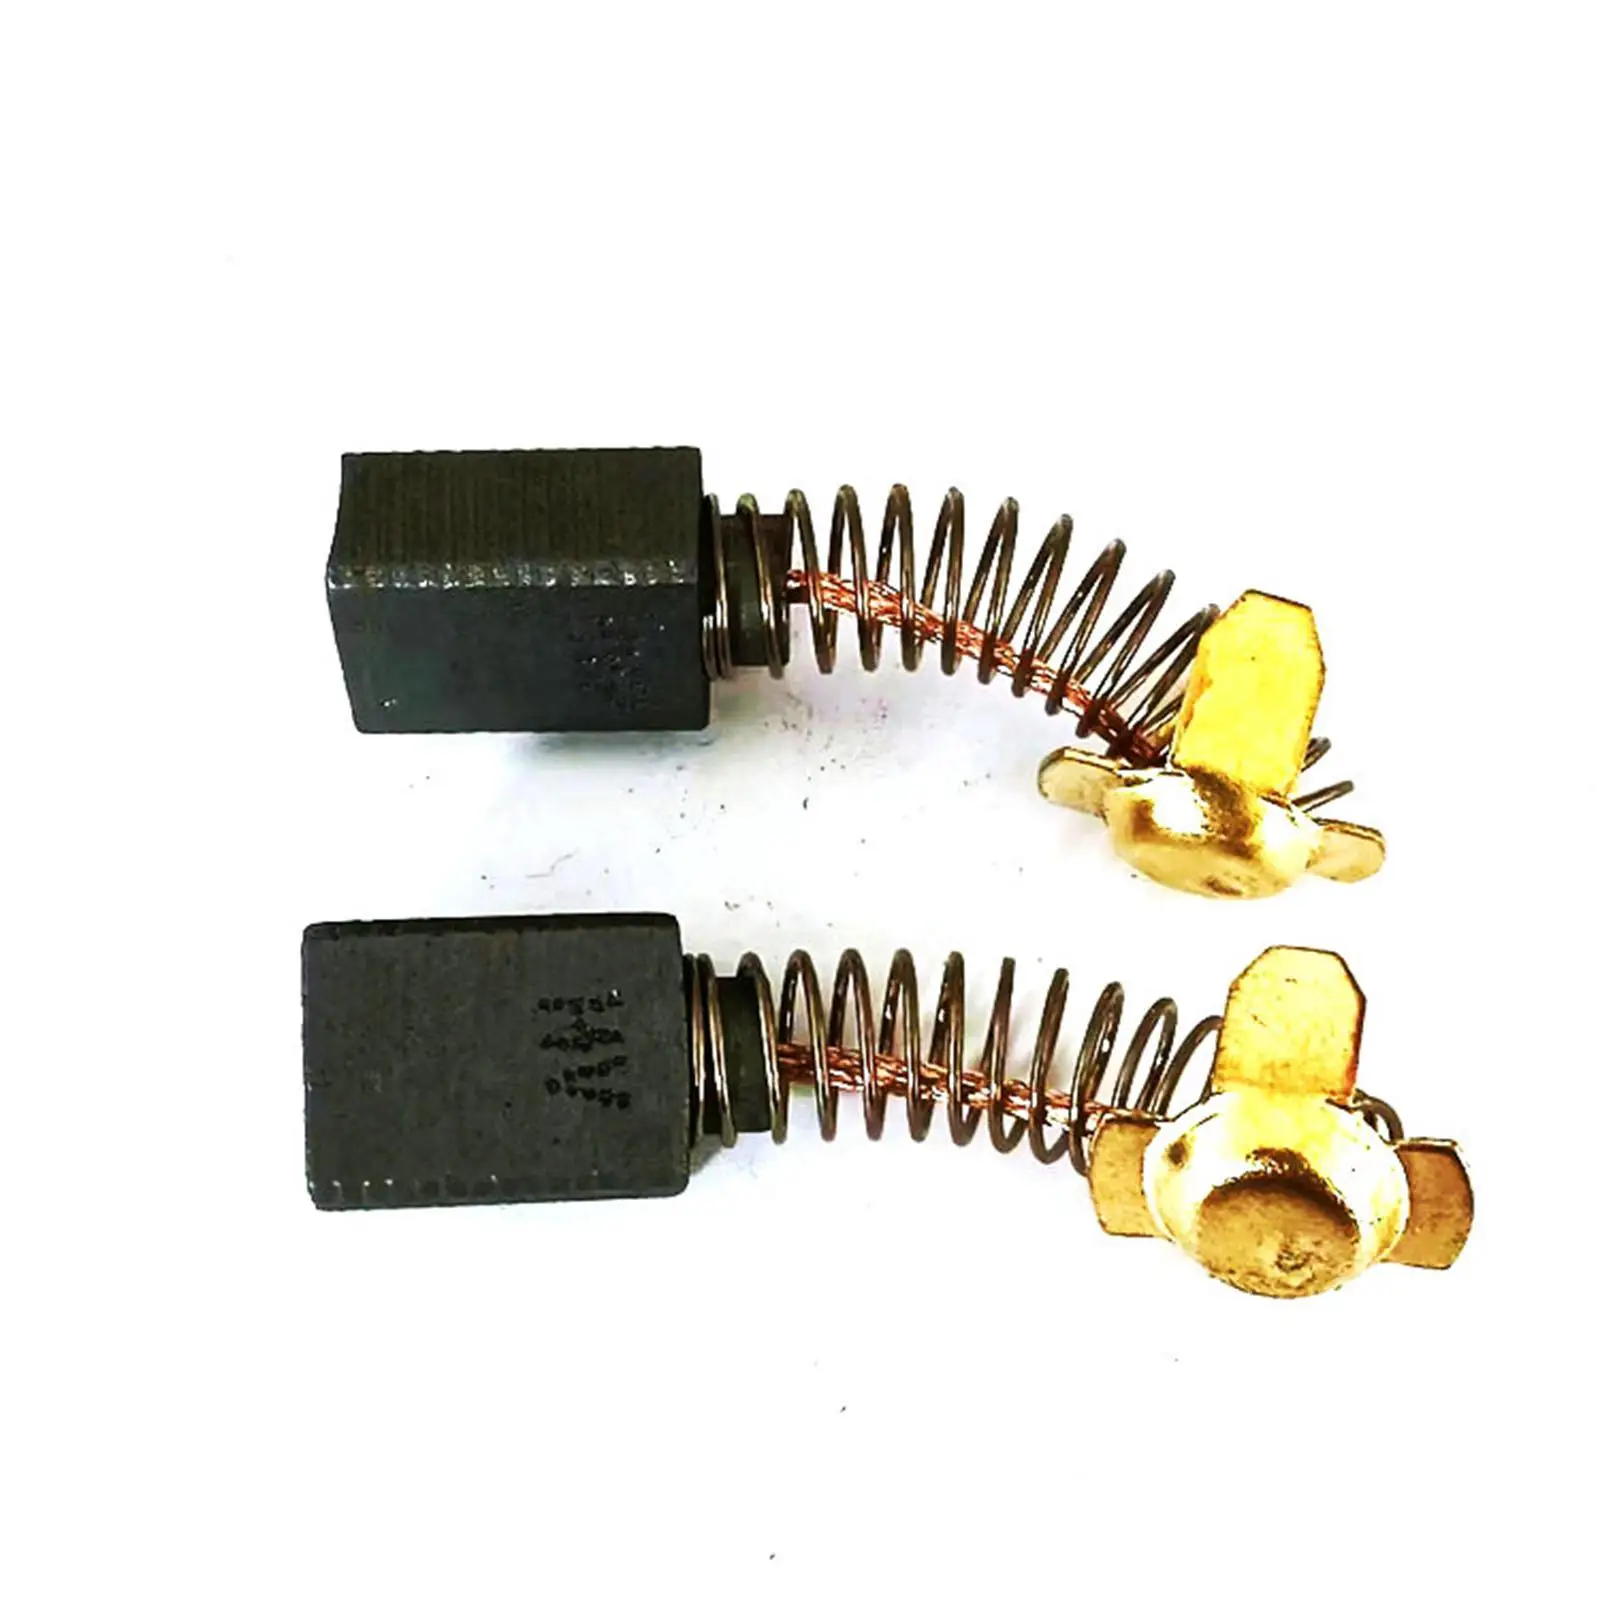 2x Professional Power Tool Replacement Repair Part Electric motor durable carbon brush for Dwp849 Dwp849XD Dwp849x Replace Parts